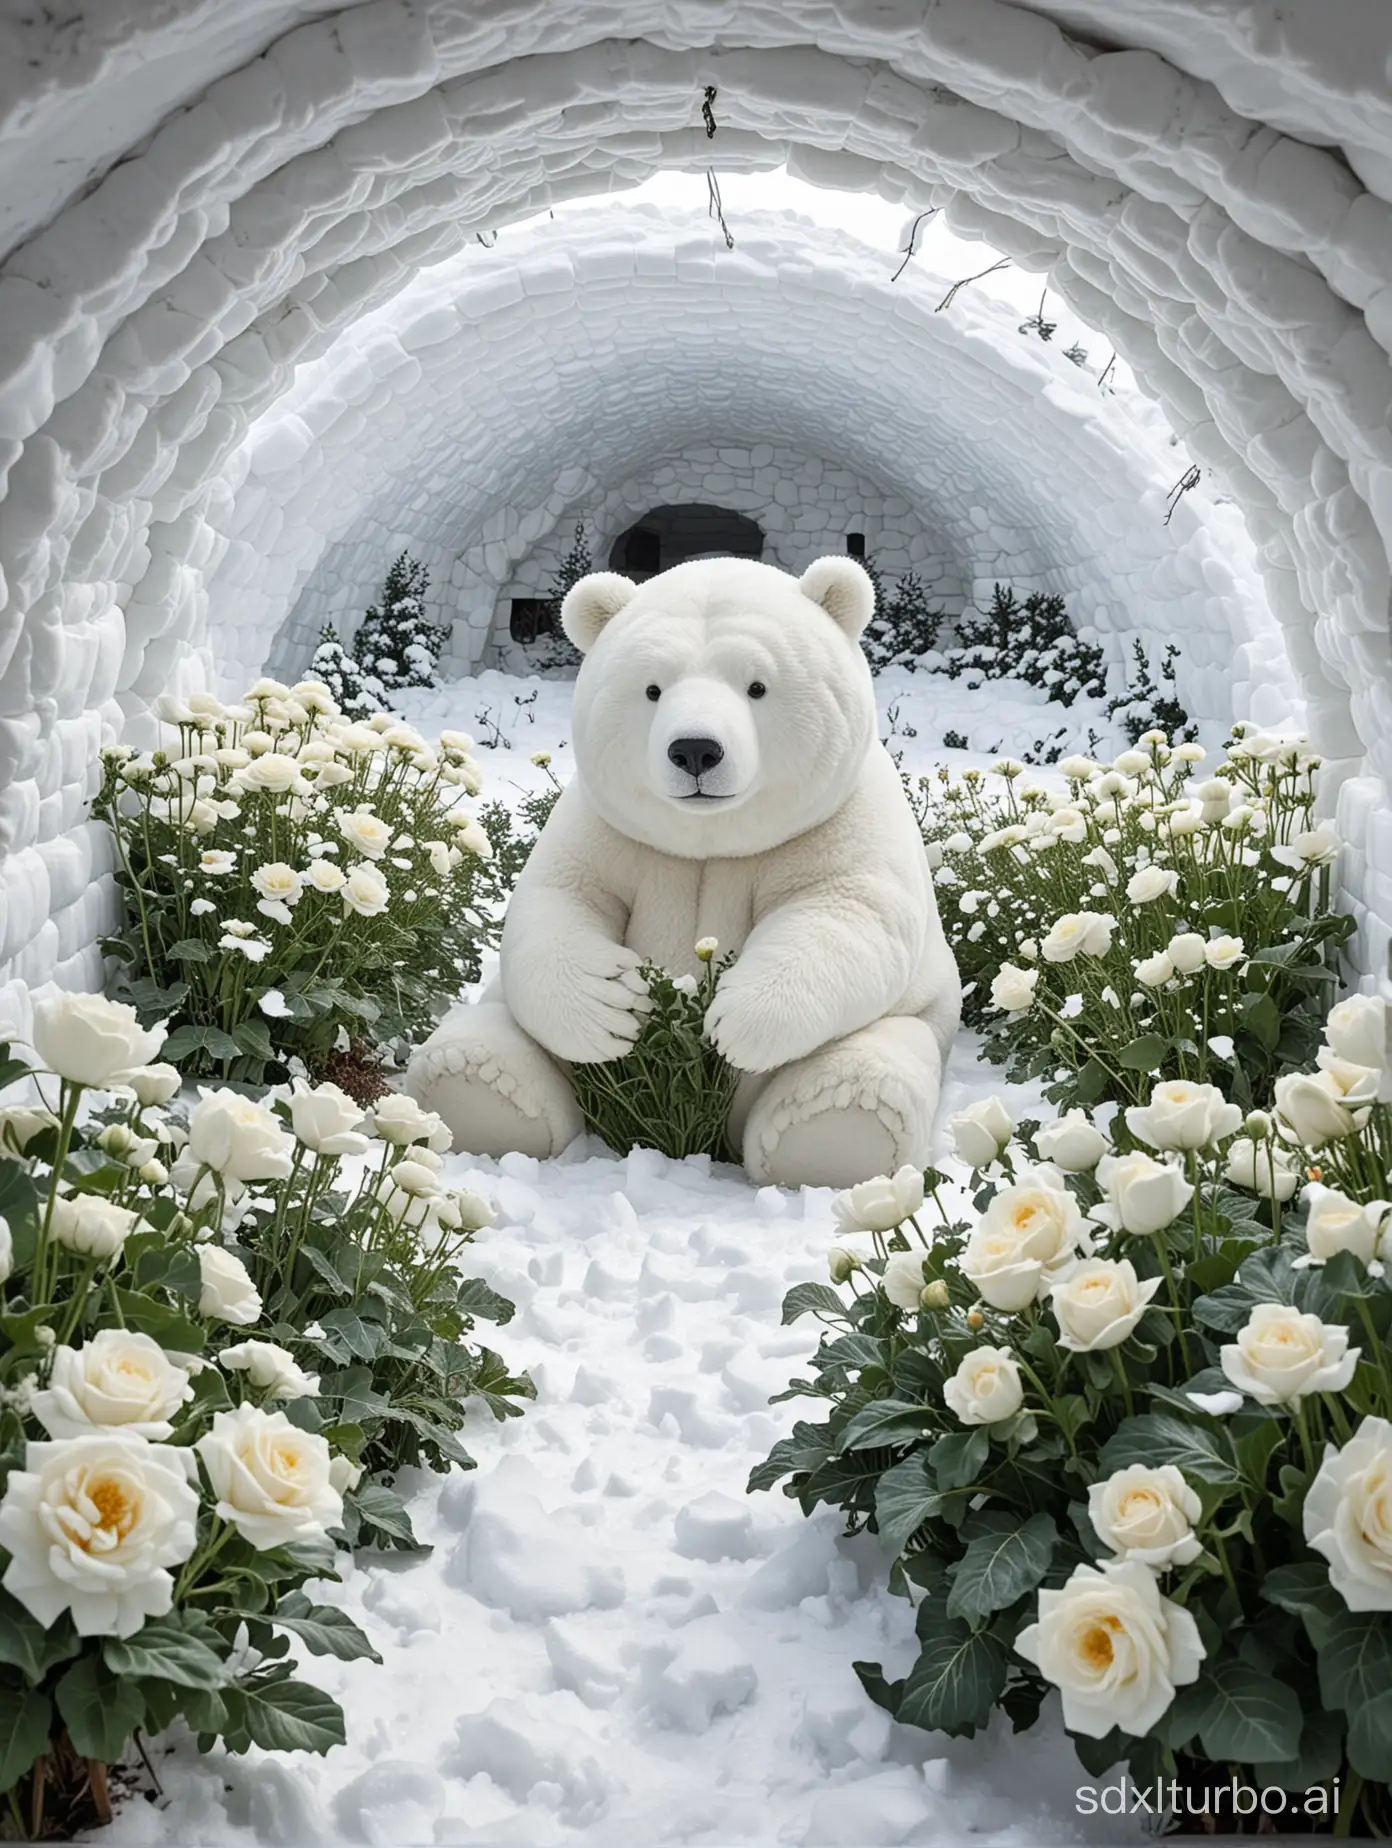 In the endless white snow, there is a dome-shaped igloo. There are a lot of cabbage piled in the corner of the igloo. There is also a fat white bear staying in the igloo. The big white bear looks forward to it with eagerness. His eyes looked at the outside world through the glass of the igloo. Spring flowers are blooming outside, and there are a group of people holding flowers looking forward to it going out.